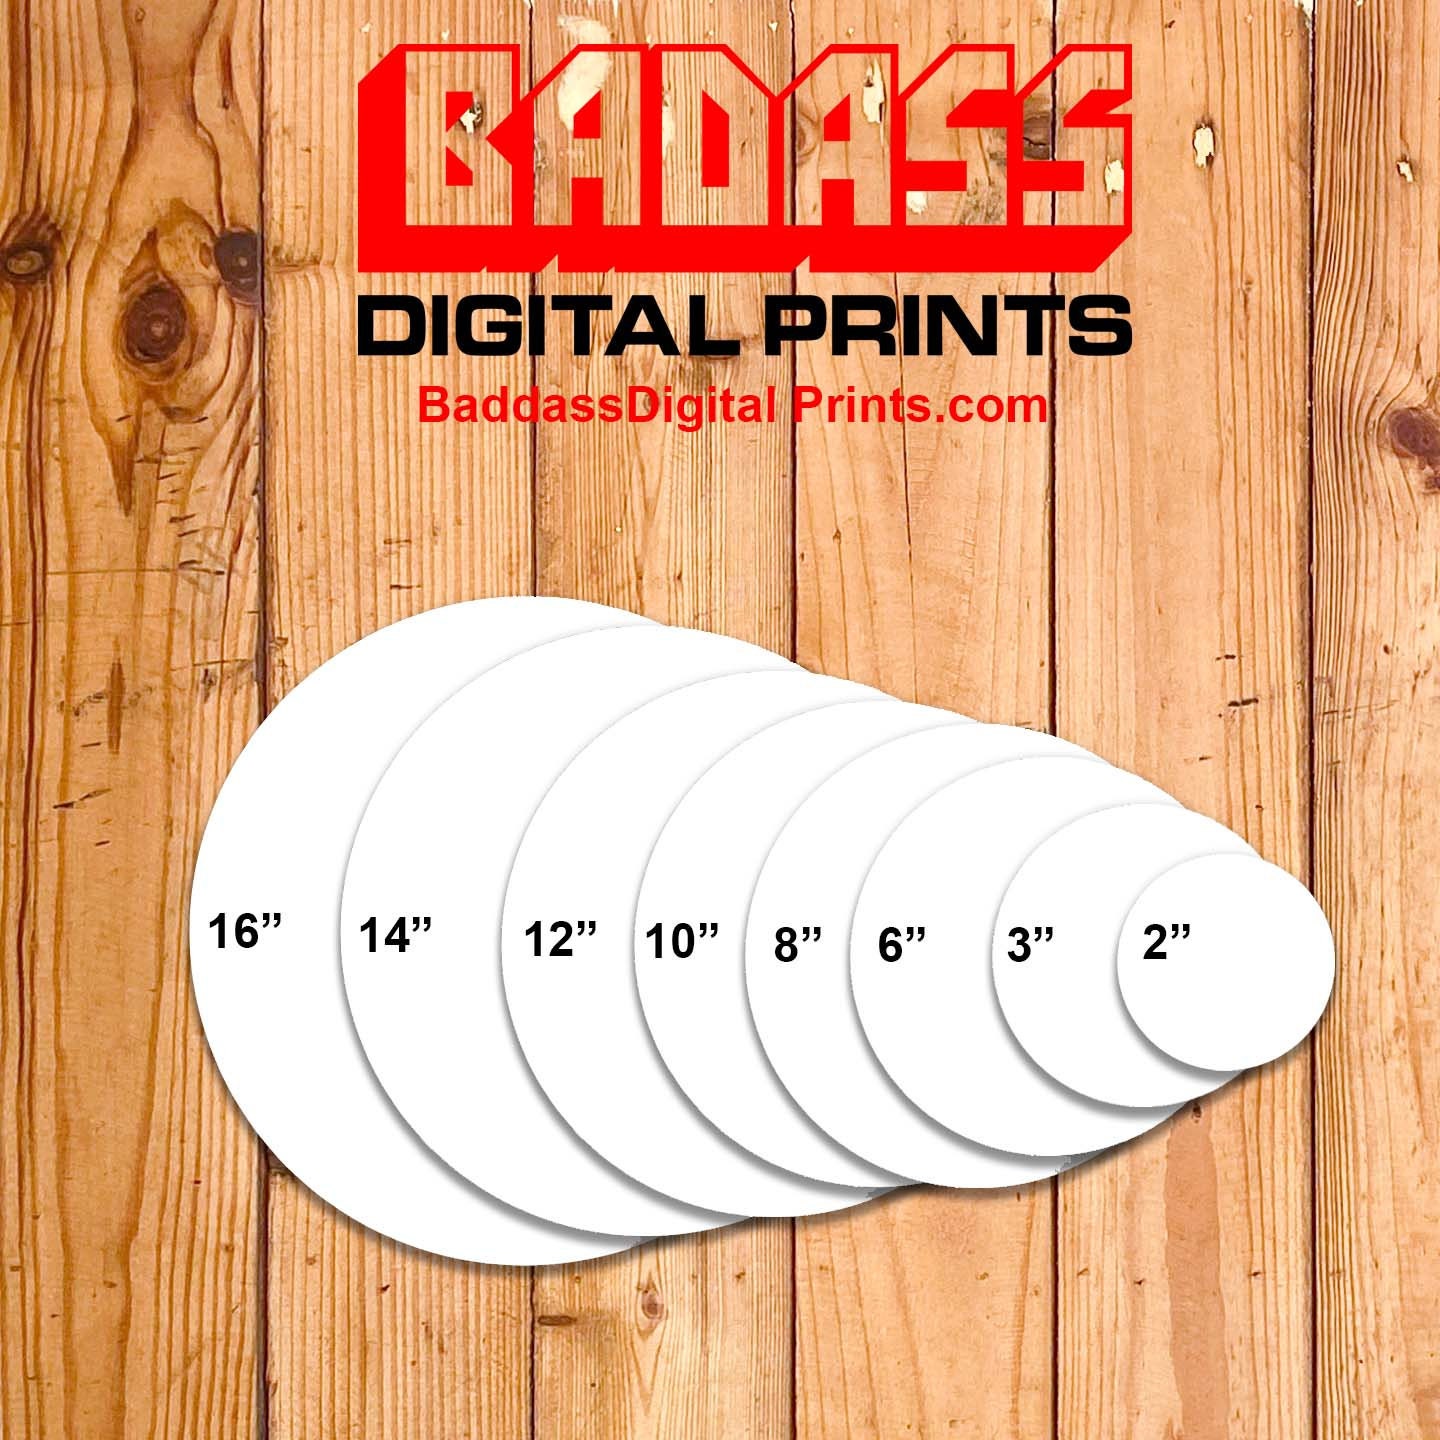 6 Inch x 3 Inch 10 Pack Sublimation License Plate Blanks,Heat